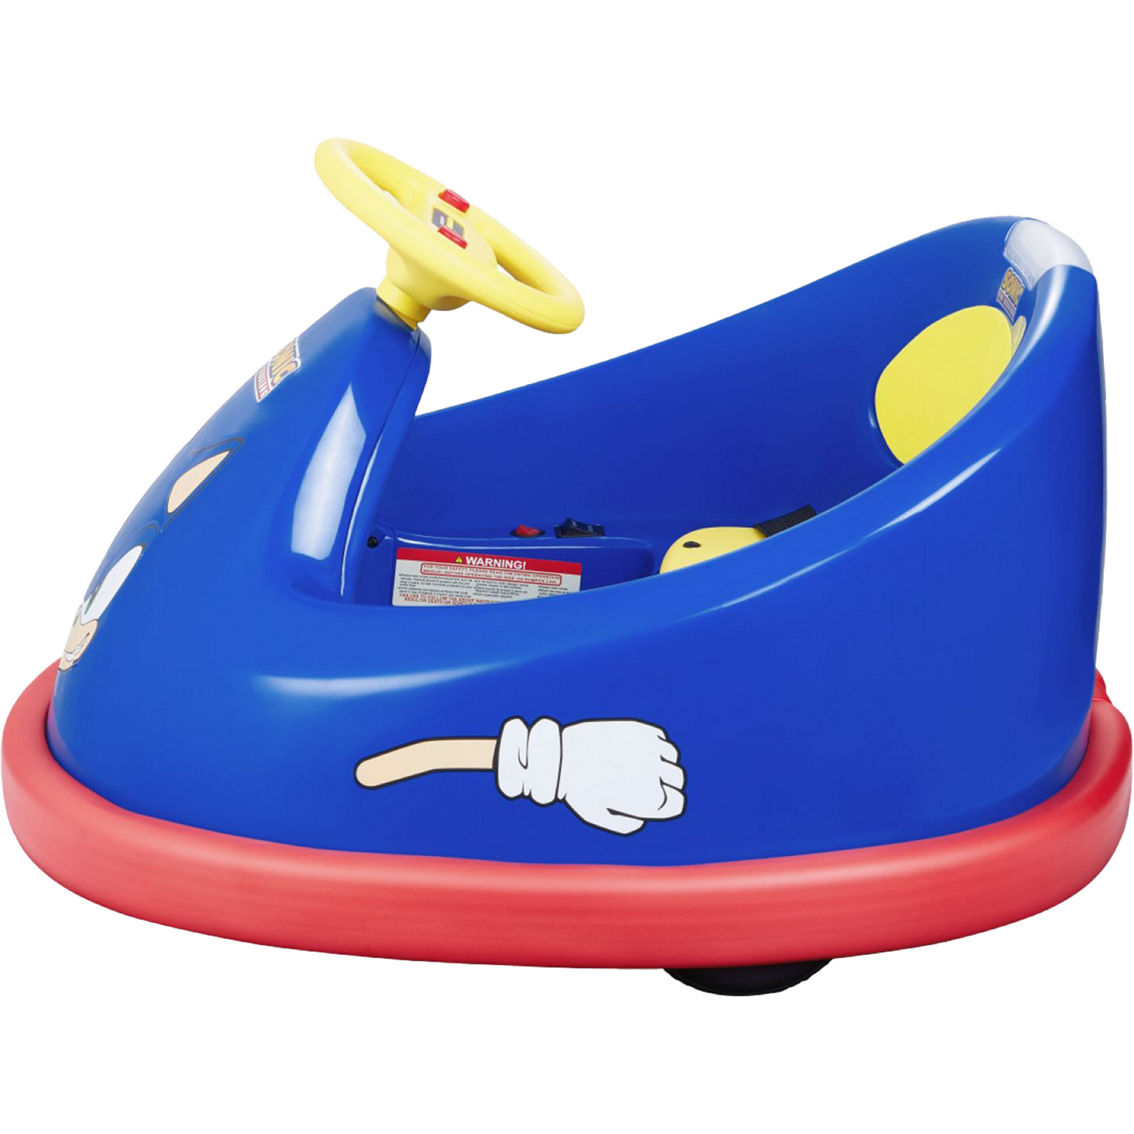 Sonic the Hedgehog Electric Ride On Bumper Car - Image 4 of 8